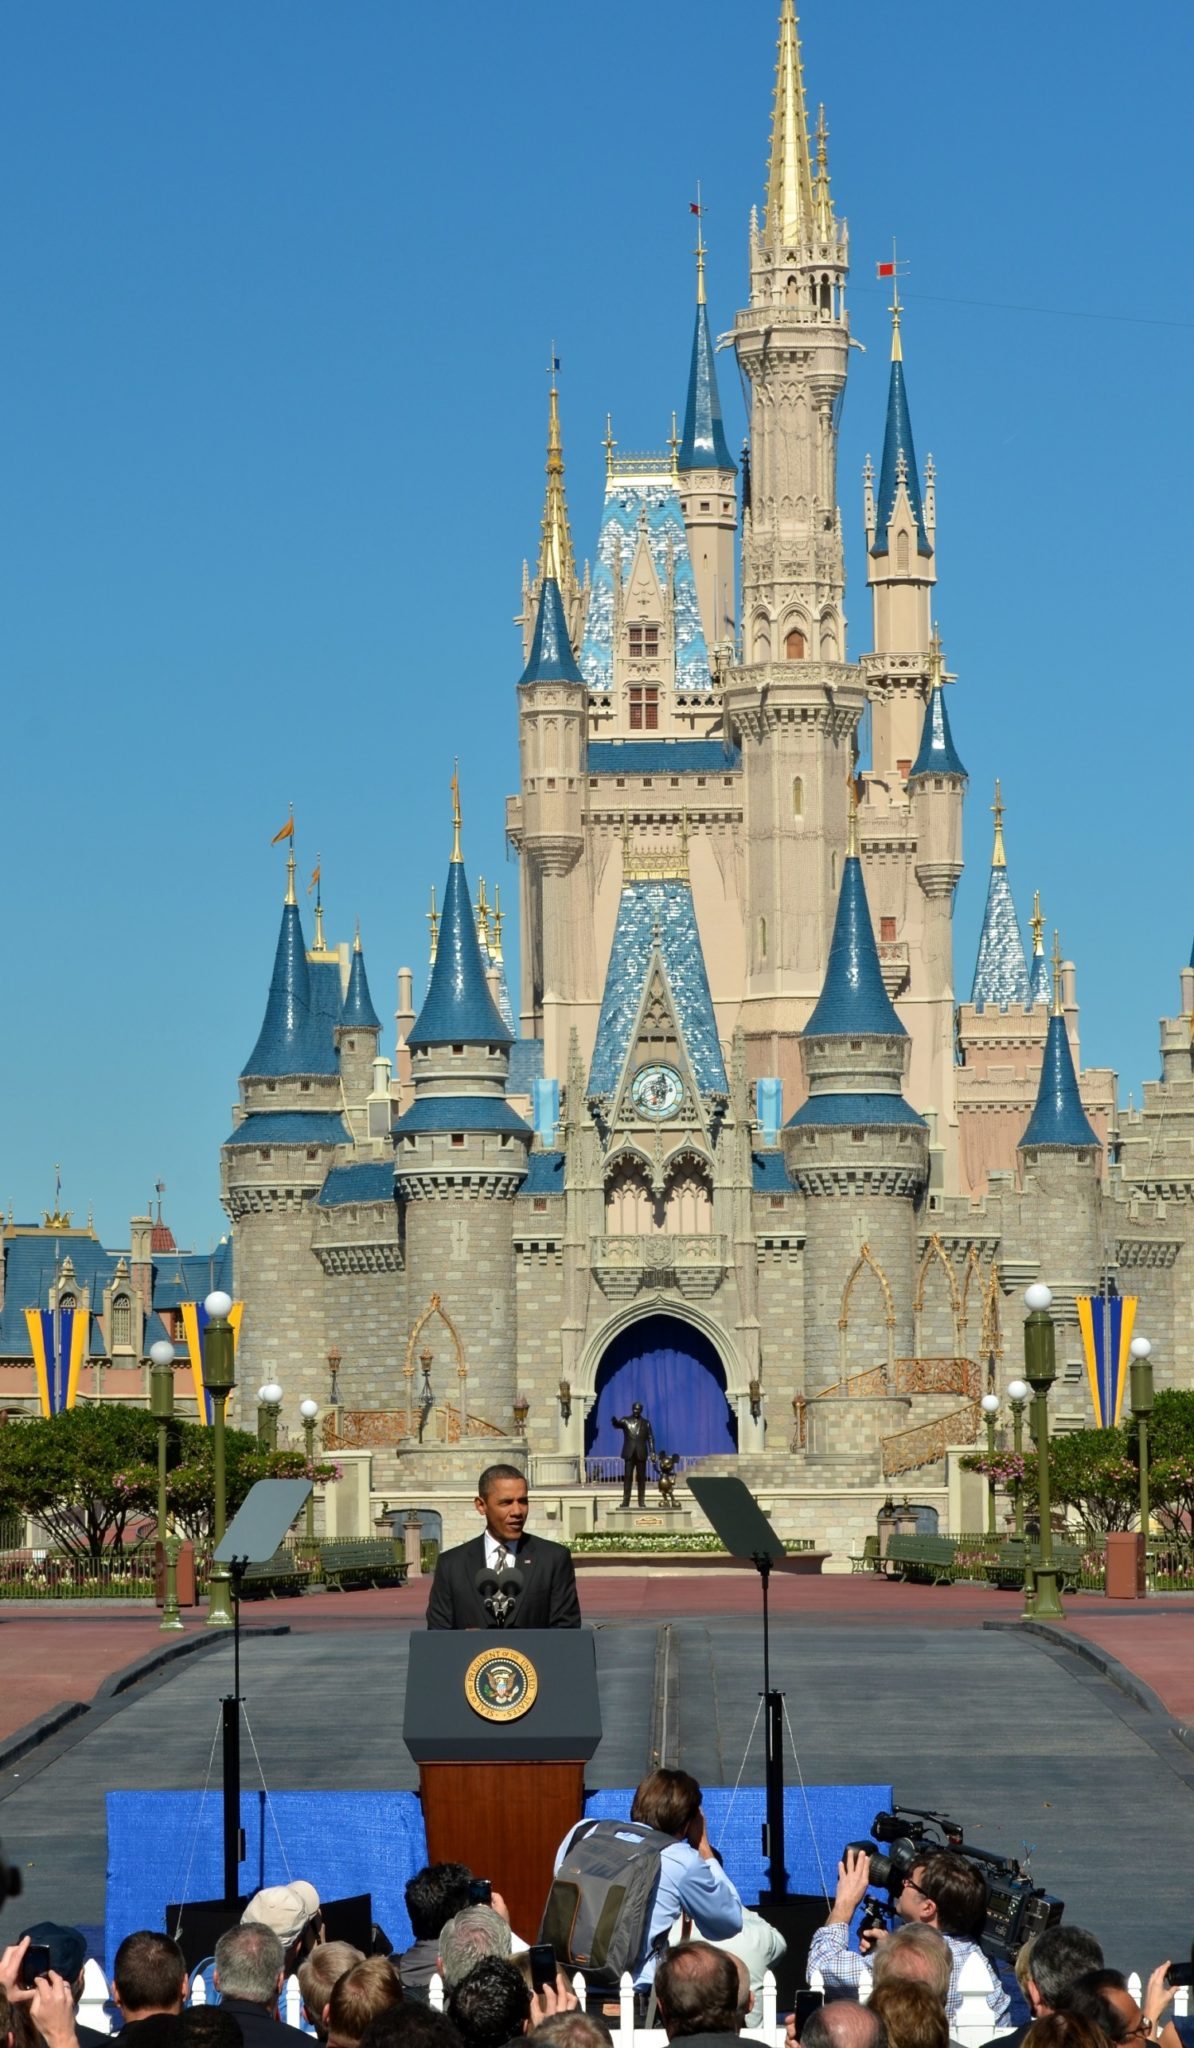 LAKE BUENA VISTA, FL - JANUARY 19: U.S. President Barack Obama speaks to a crowd of supporters at Walt Disney World's Magic Kingdom with Cinderella Castle in the background January 19, 2012 in Lake Buena Vista, Florida. Obama's speech addressed his "We Can't Wait" initiative to create jobs partly through boosting travel and tourism. (Photo by Roberto Gonzalez/Getty Images)